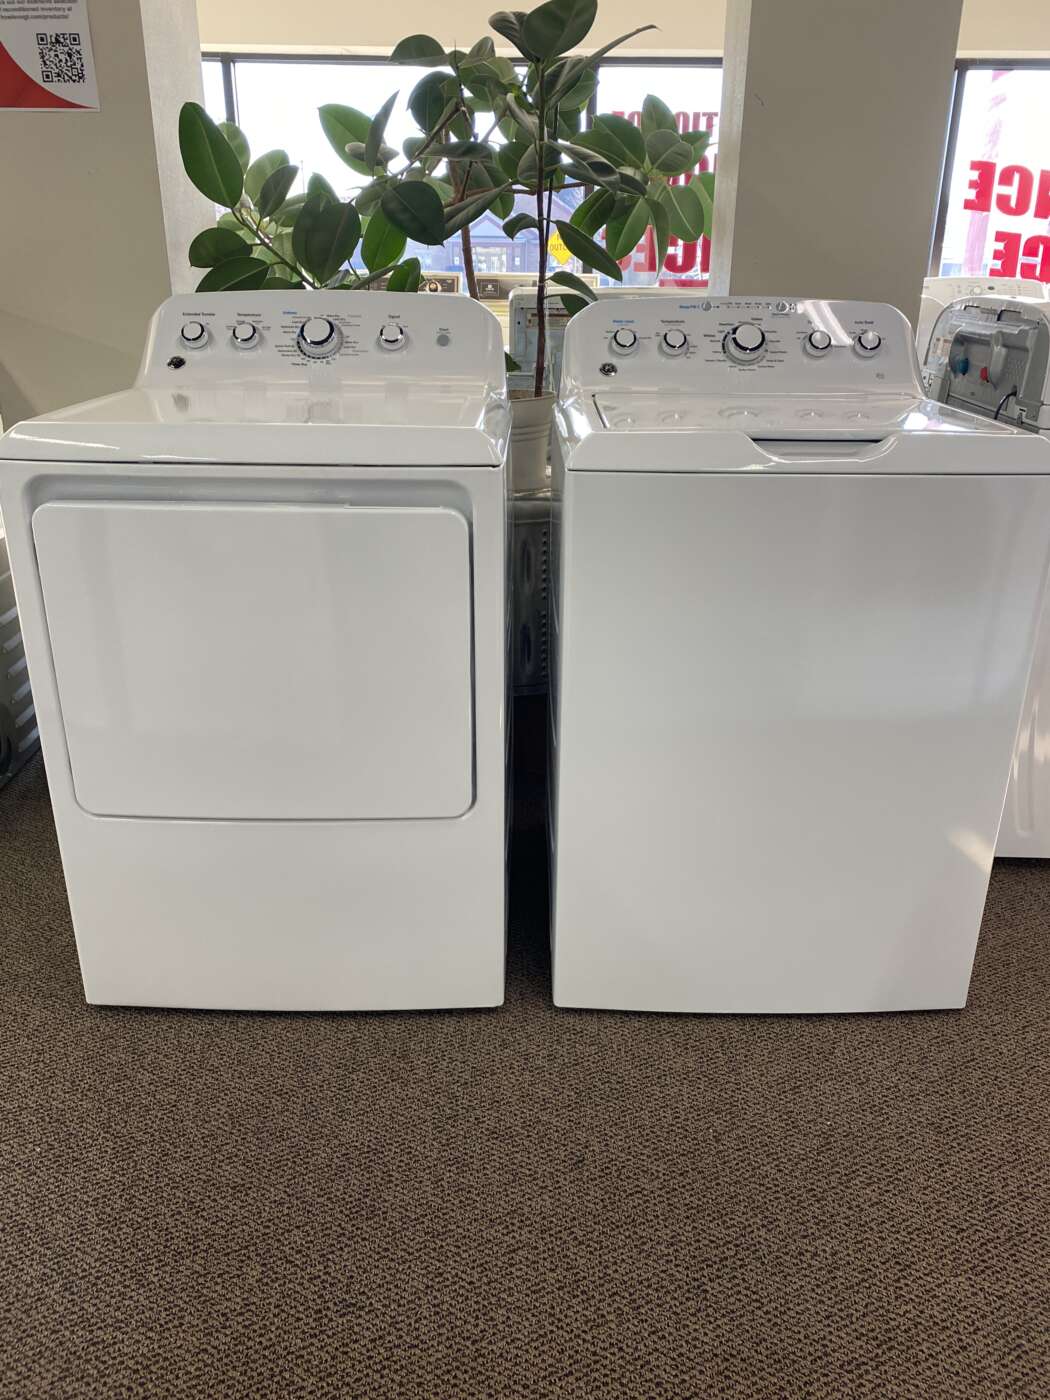 Reconditioned G/E 4.5 Cu. Ft. Top-Load Washer & 7.2 Cu. Ft. Electric Dryer – White